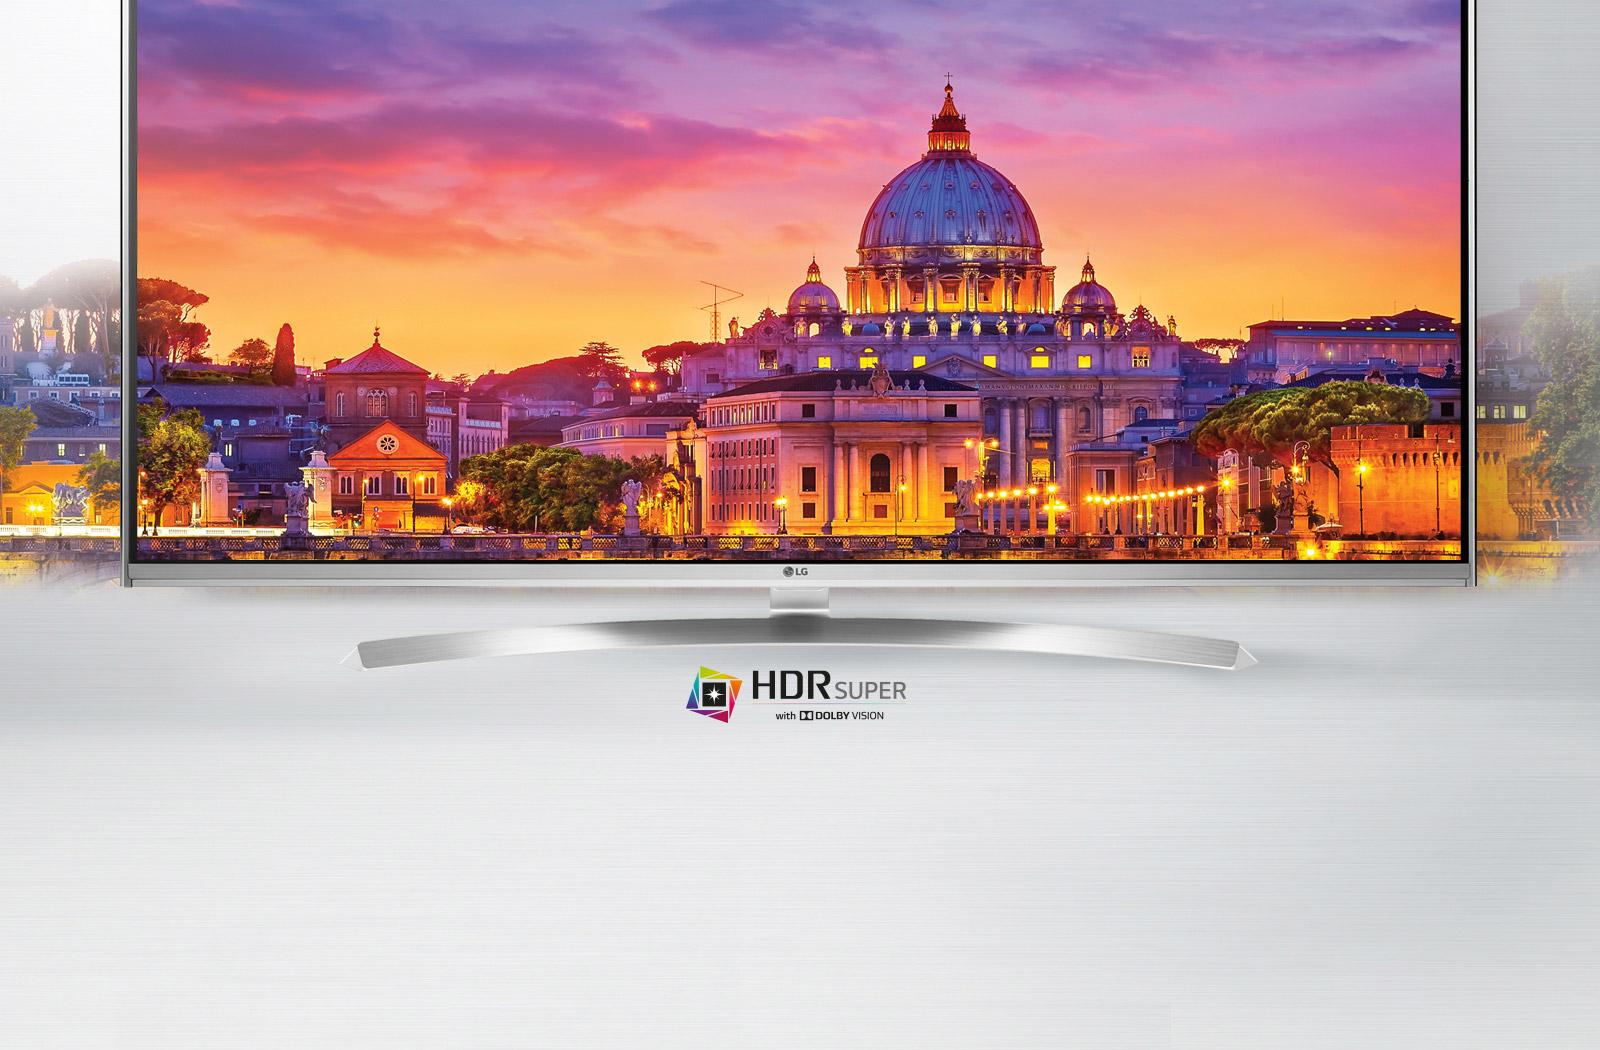 HDR Super with Dolby Vision™